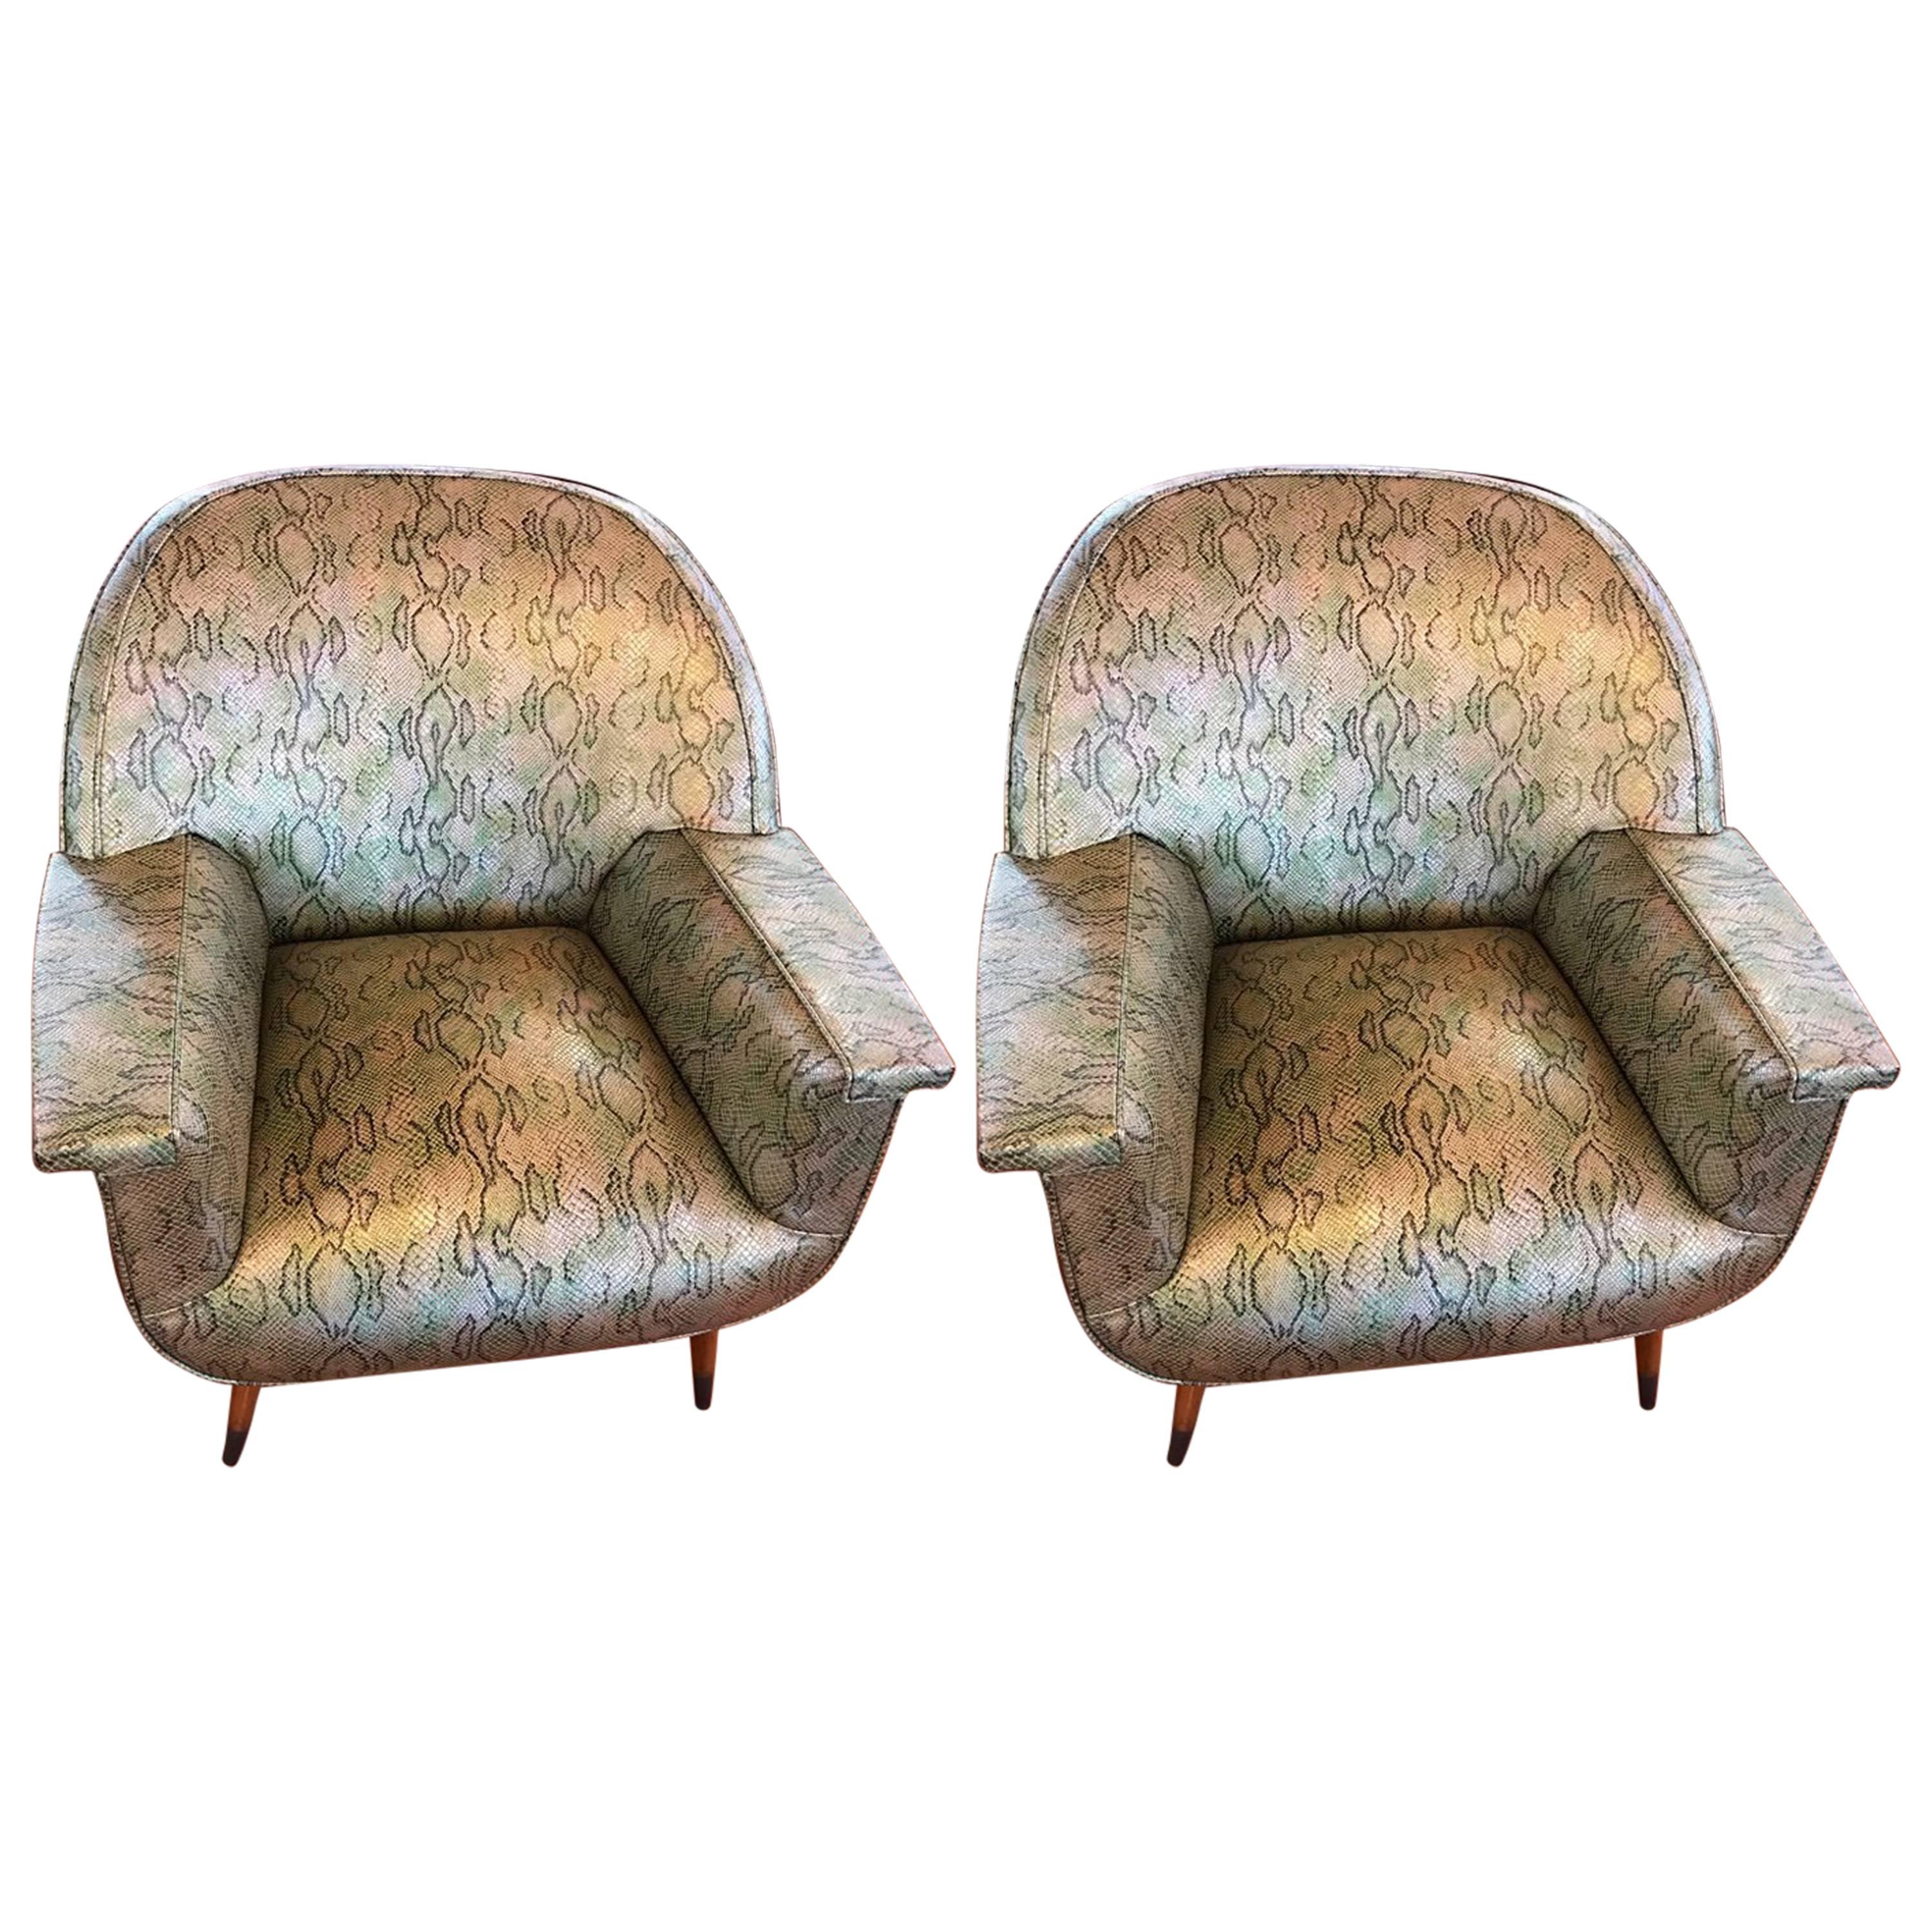 Pair of Italian Mid-Century Modern Club Chairs with Faux Snake Skin For Sale